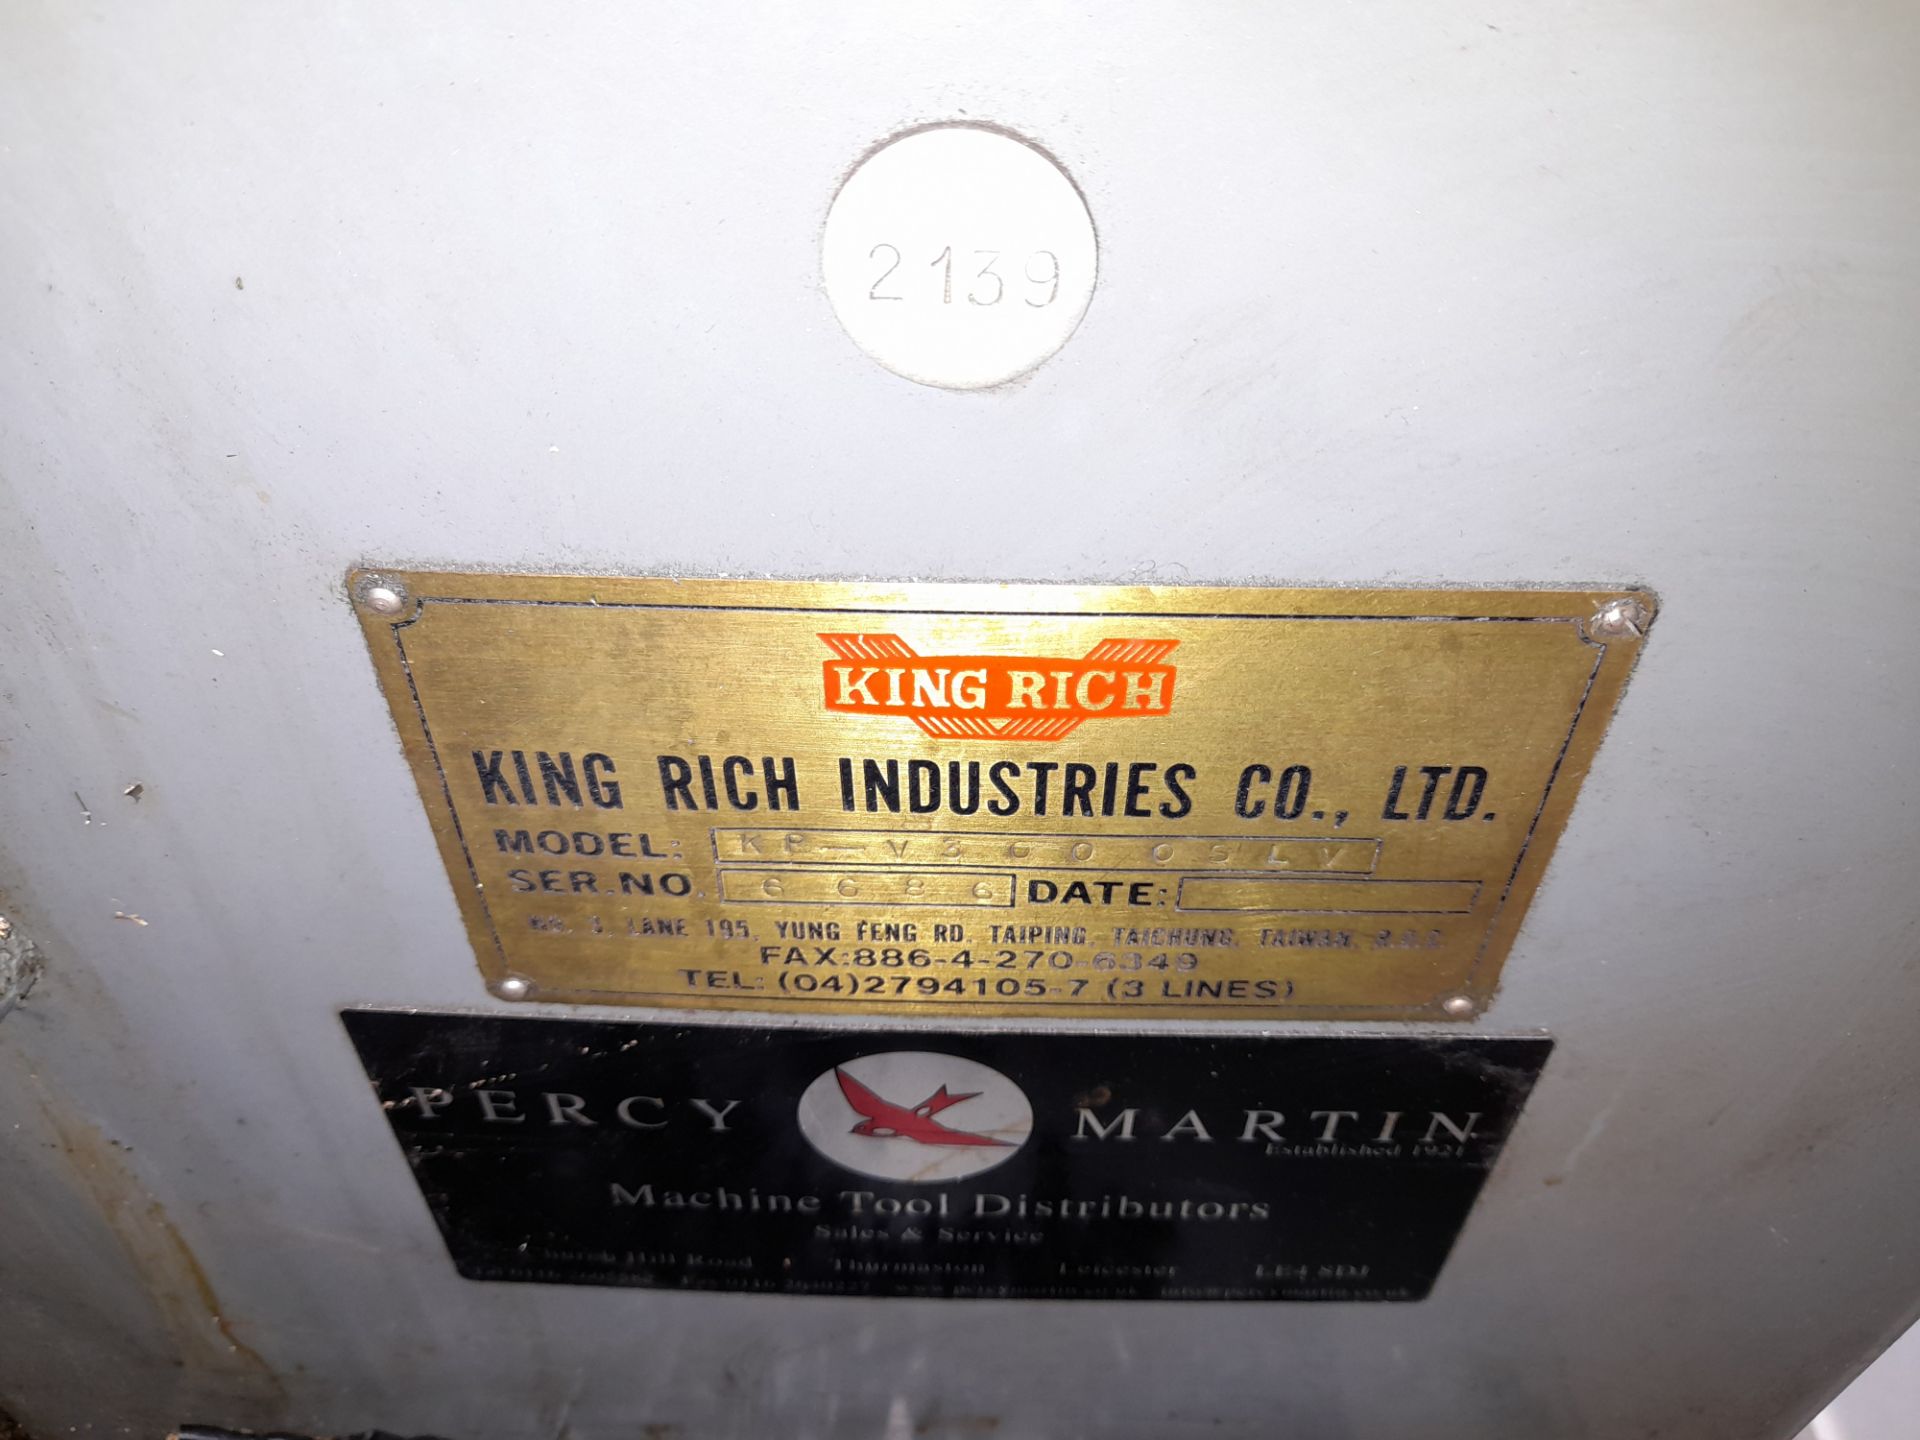 King Rich KRV3000 Turret type Vertical Milling Machine, with Newall B60 readout, model KR- - Image 8 of 12